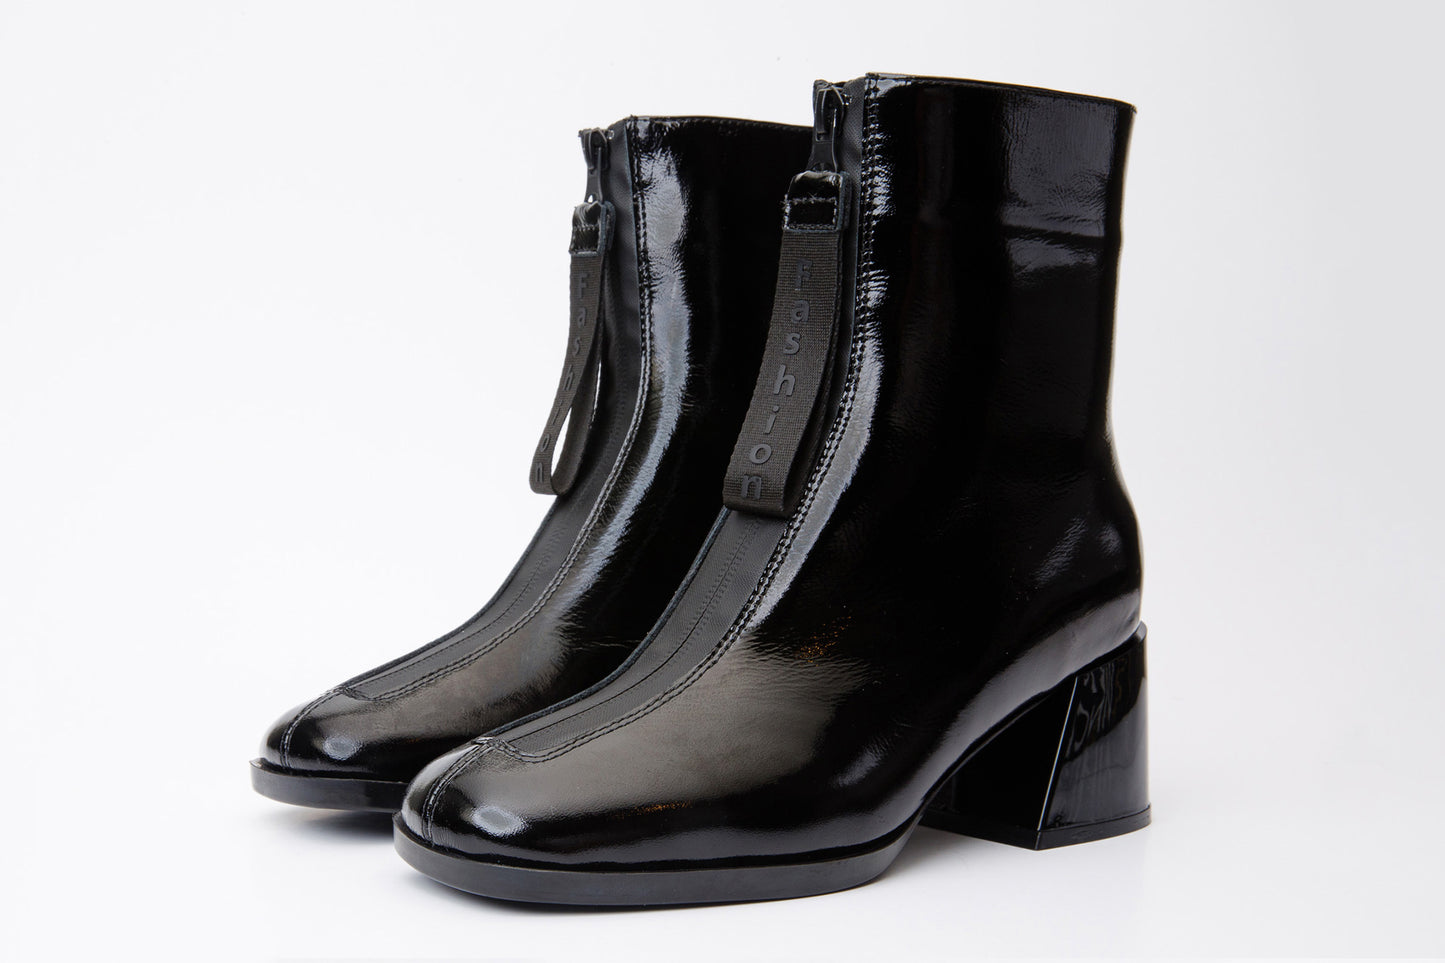 The Tackle Black Patent Leather Block Heel Women Boot